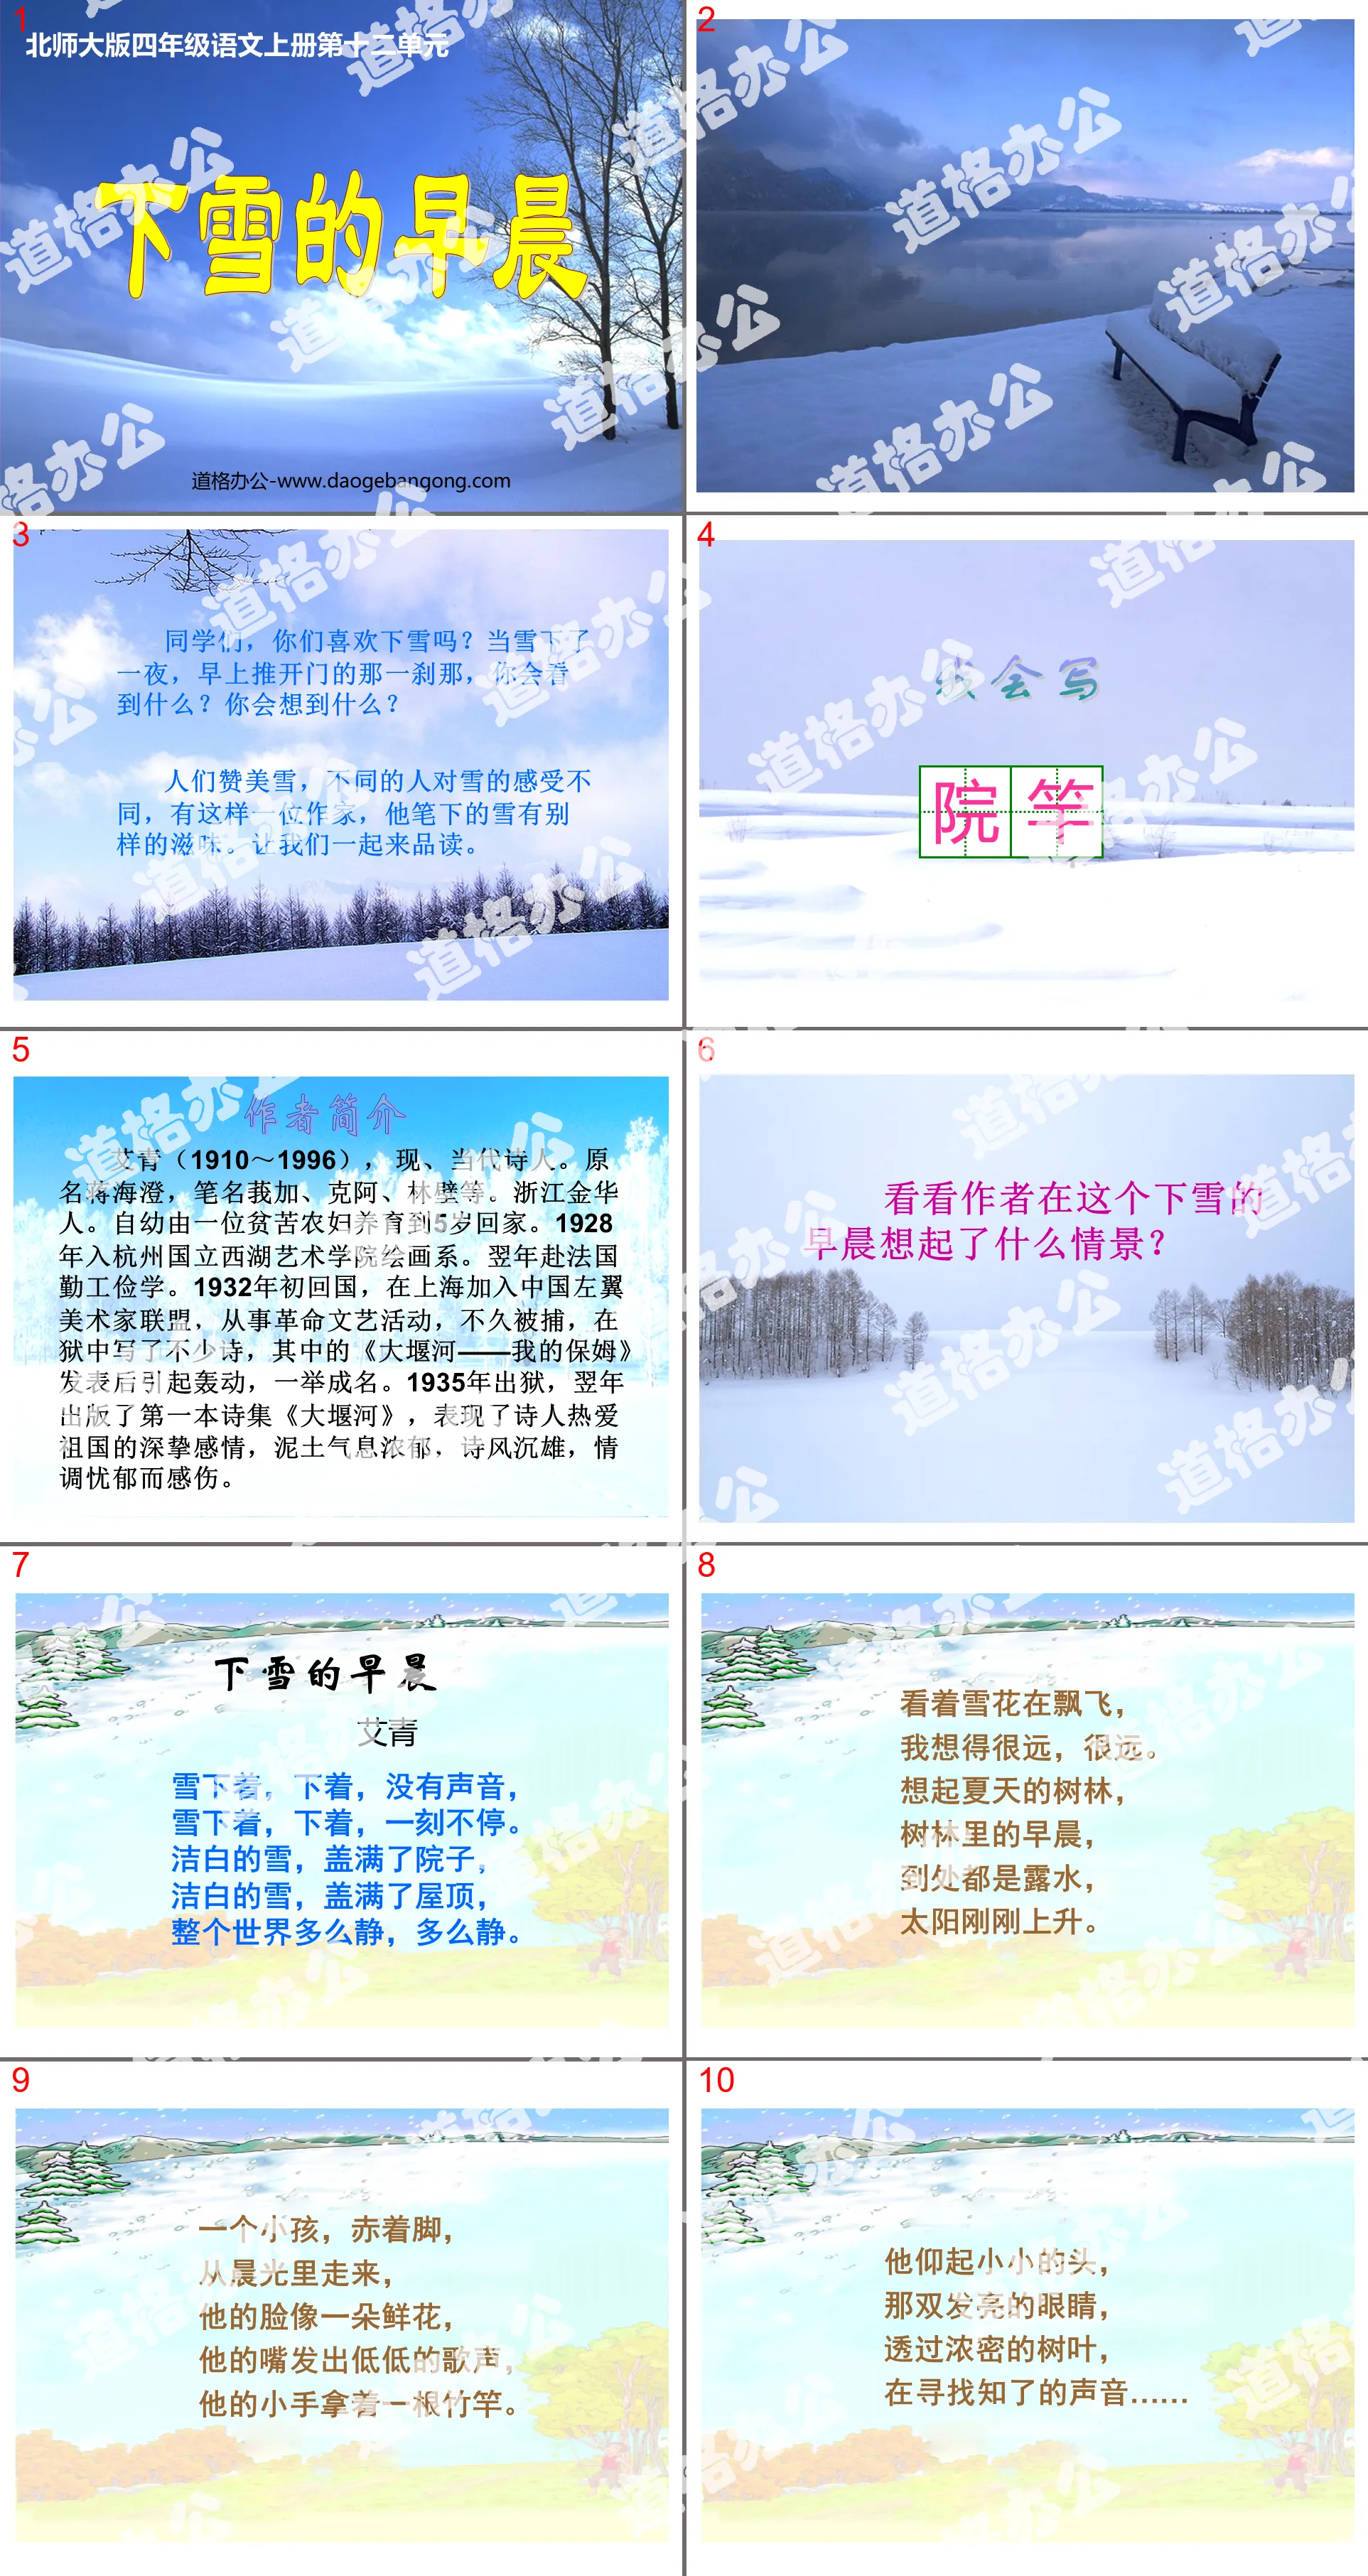 "Snowy Morning" PP courseware